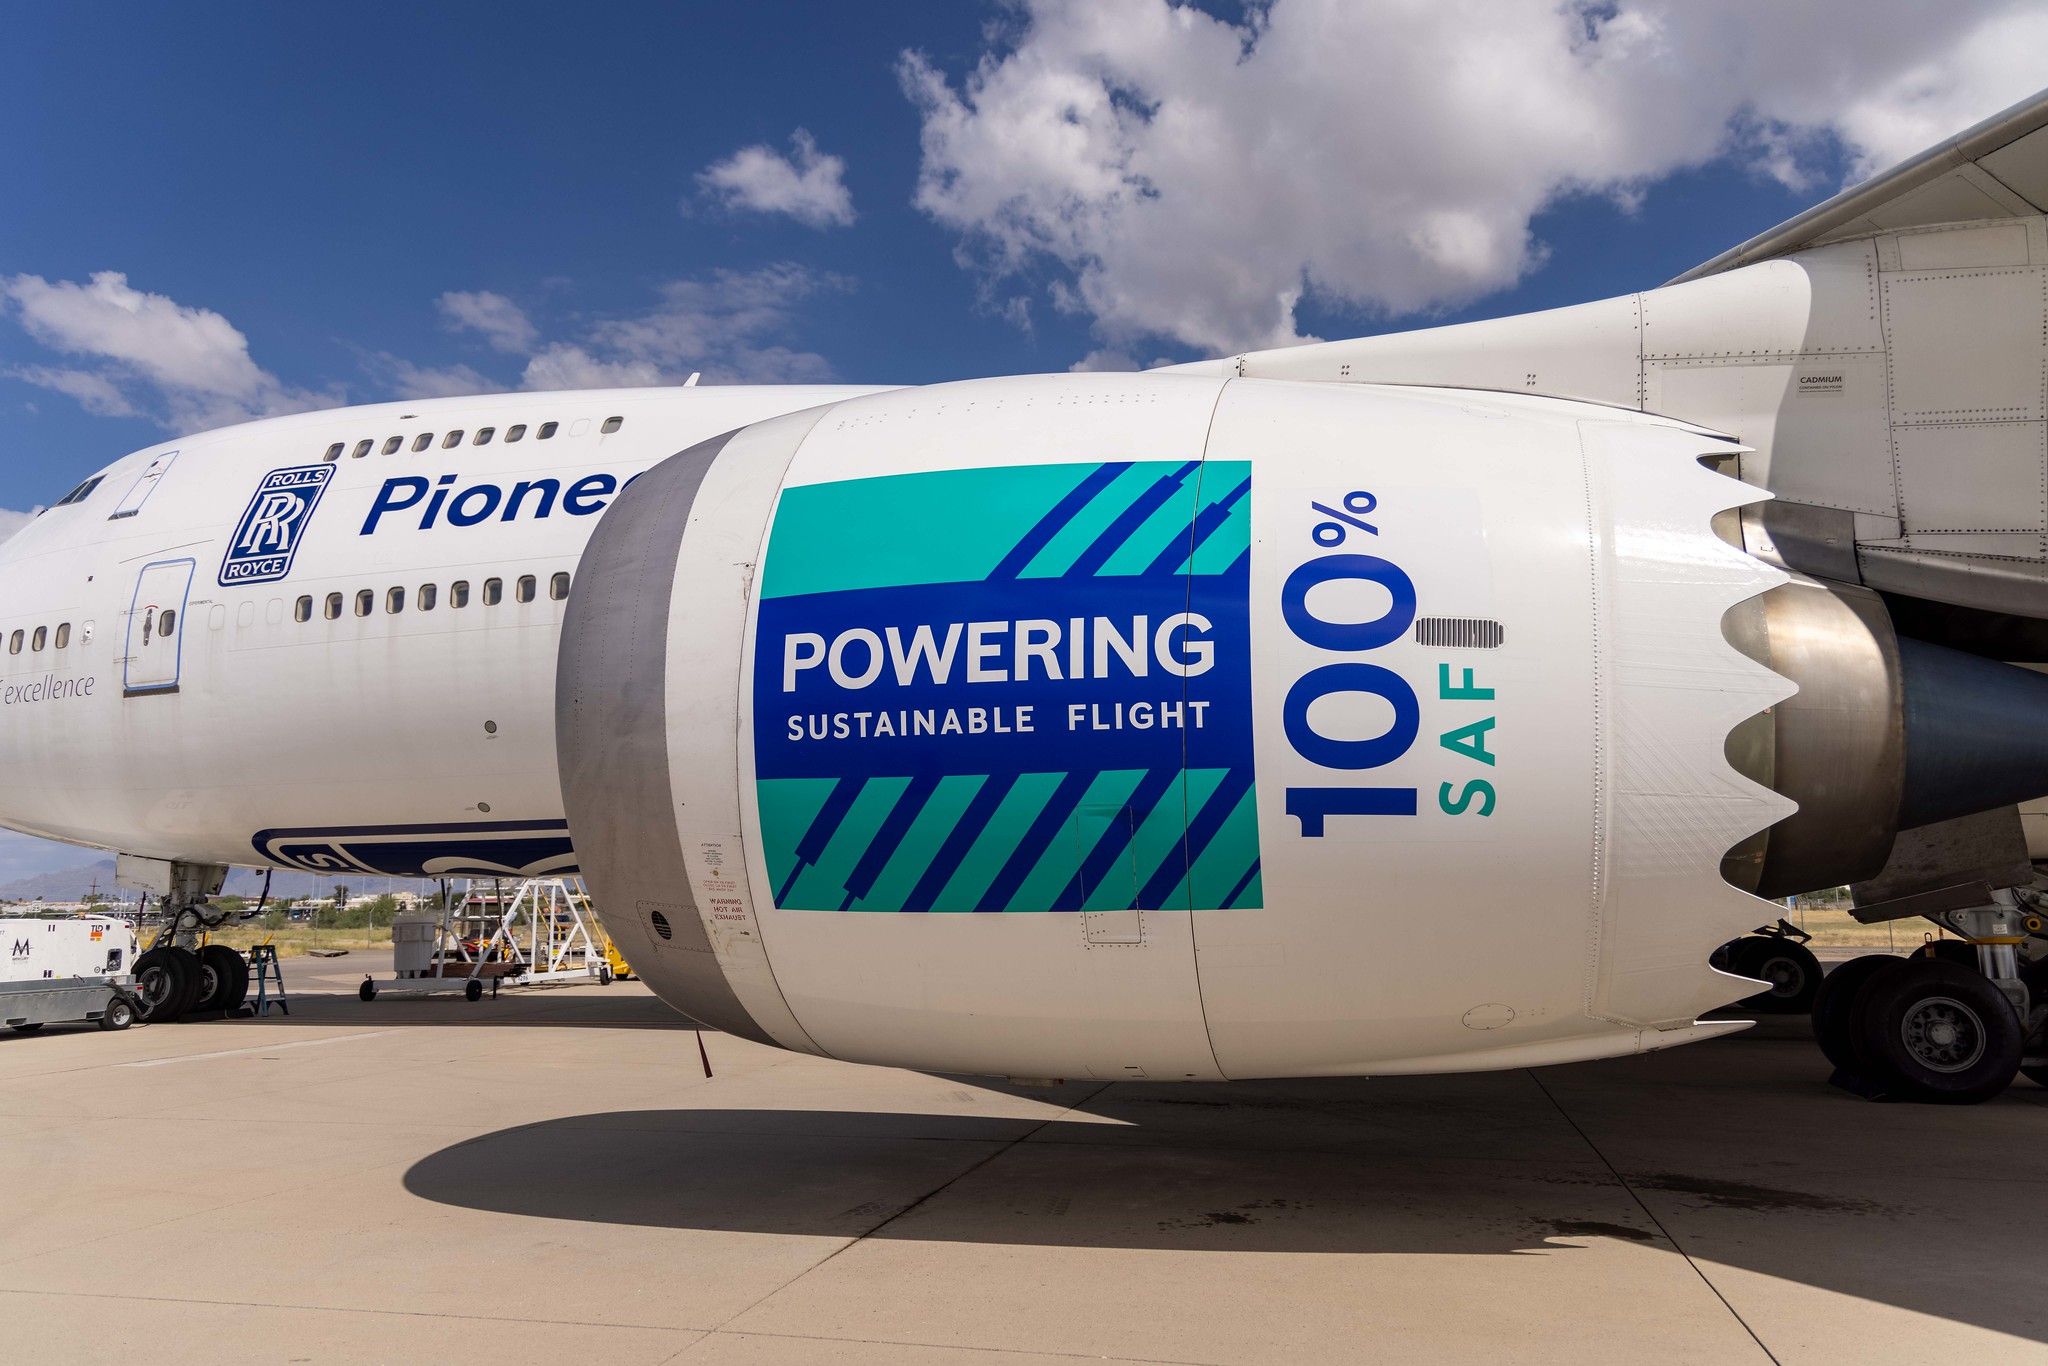 Rolls-Royce engine on 747 with sticker "powered by 100% SAF"